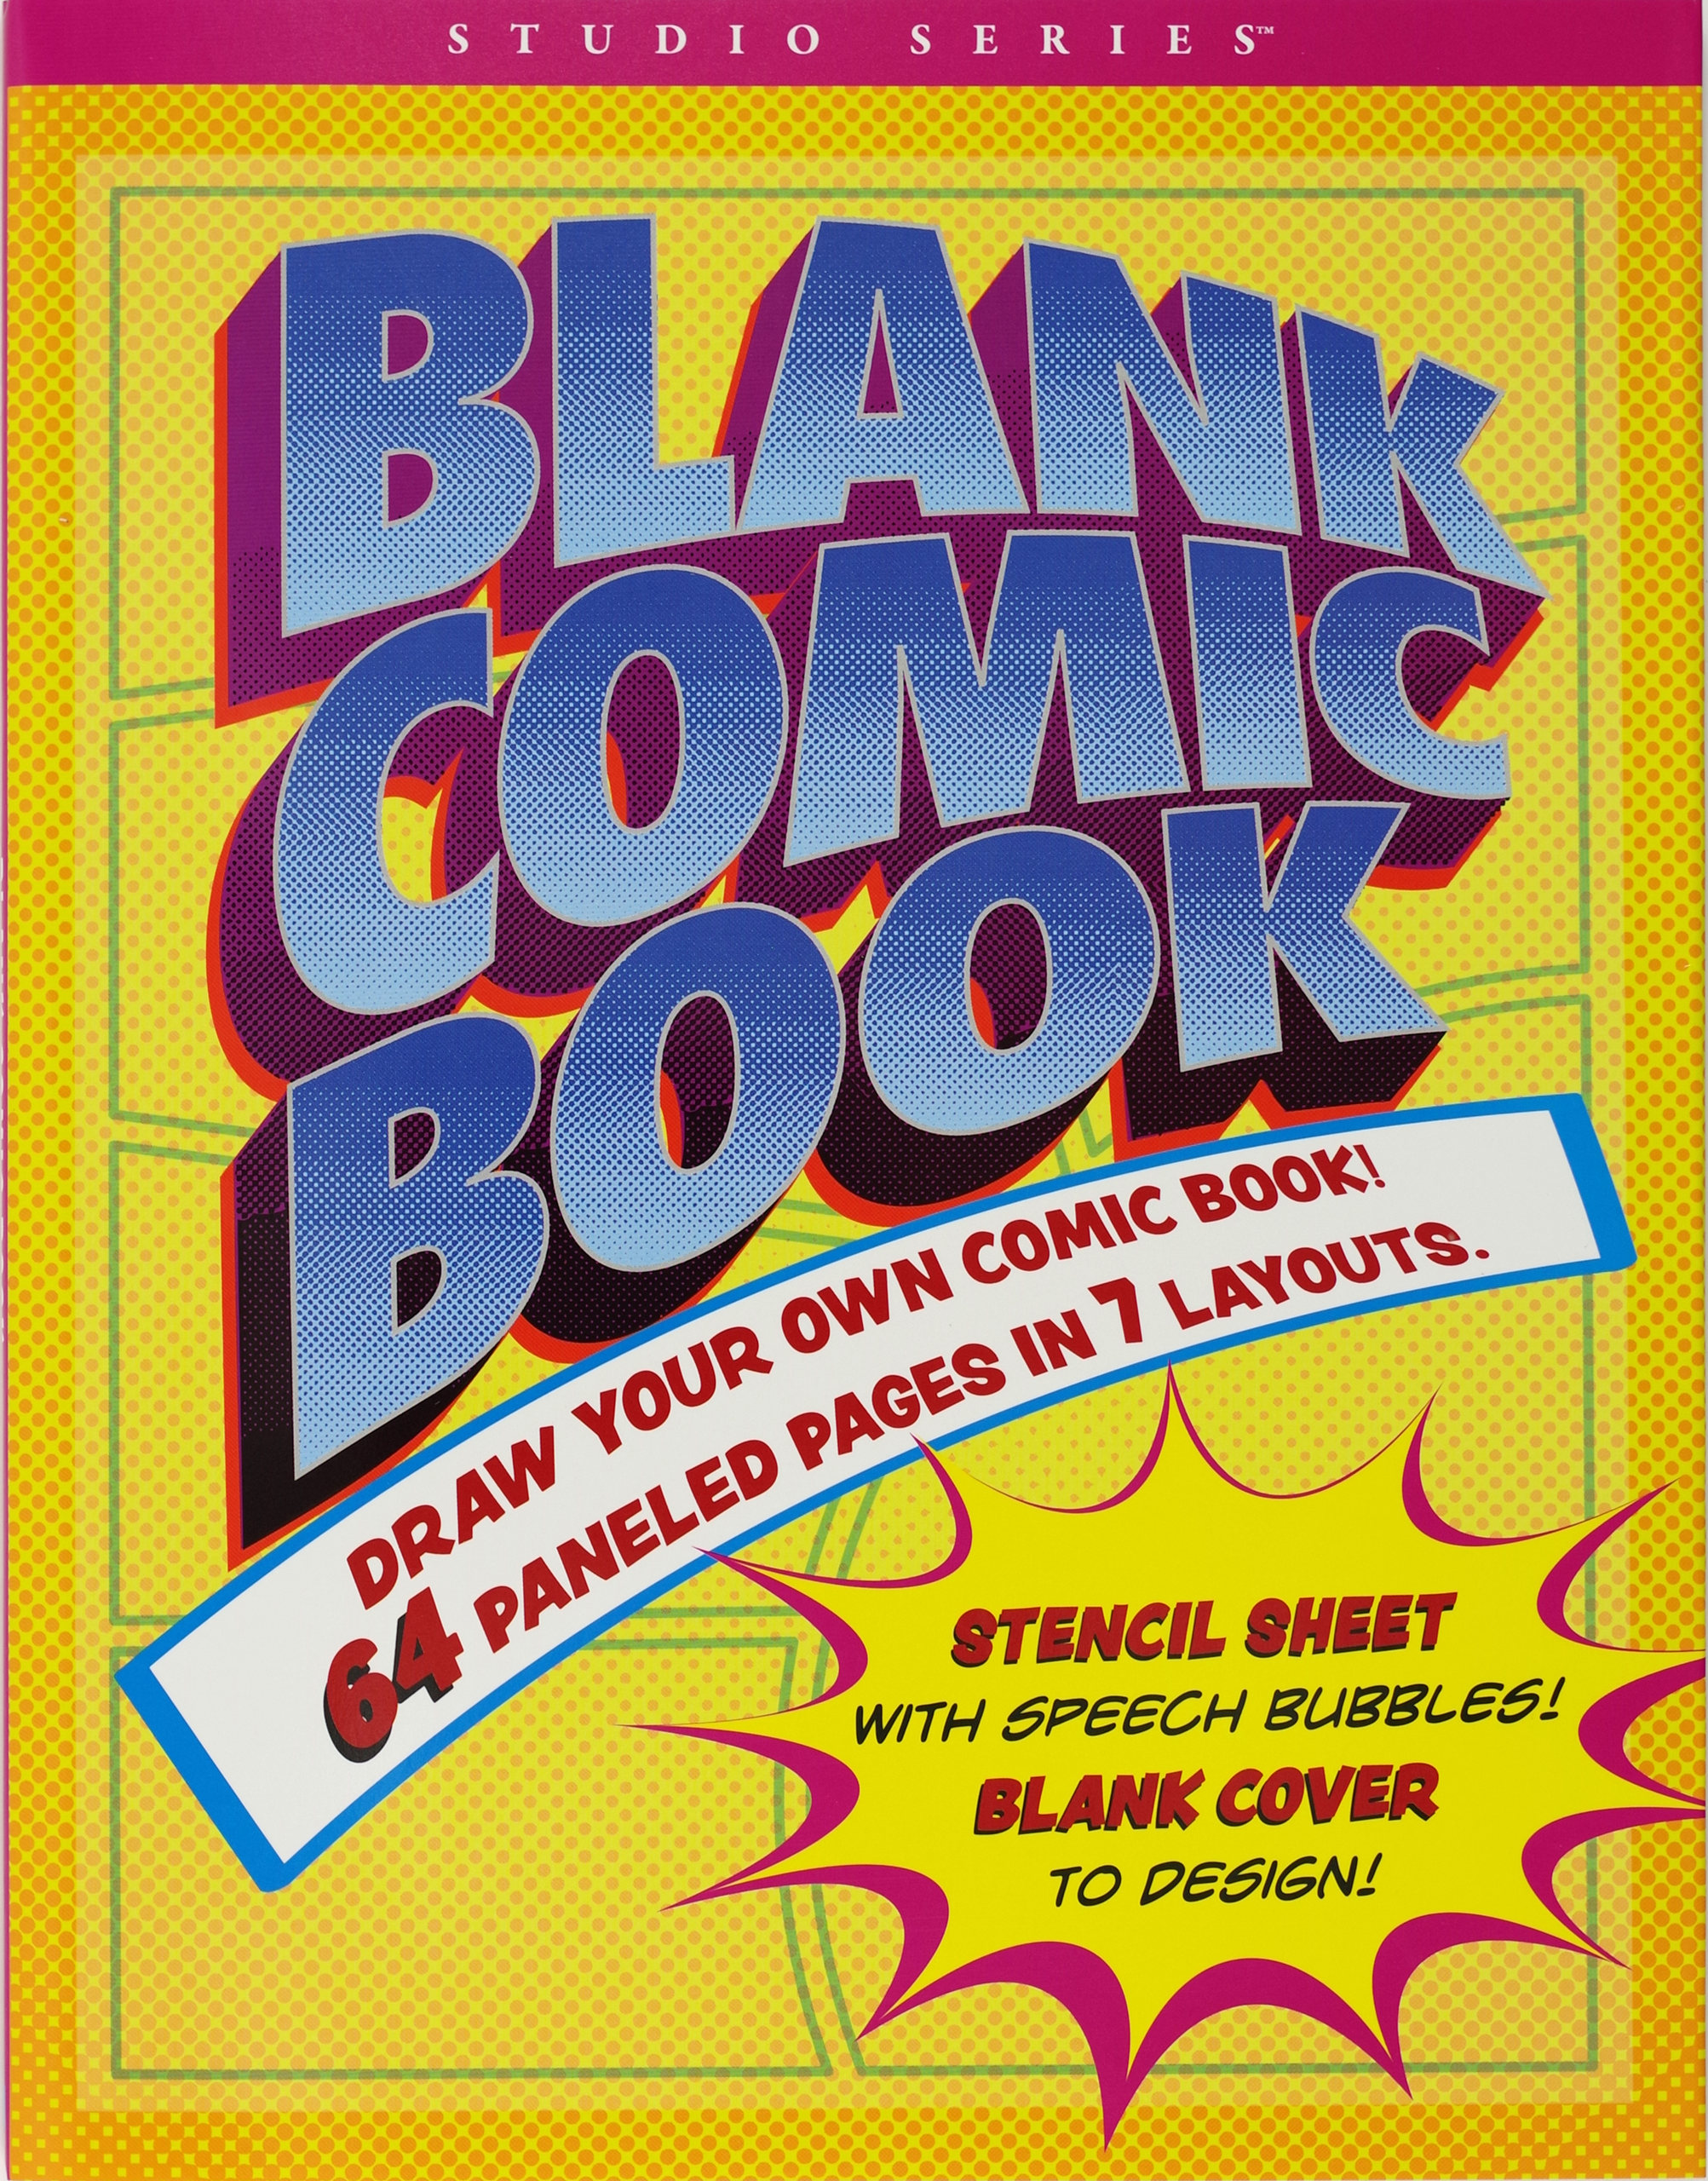 Blank Books For Kids To Write Stories: Cartoon Comic Drawing Panel For  Create Your Own Comics Stories , Writing or Sketching Your idea and design  By  x 11: Volume 4 (Blank